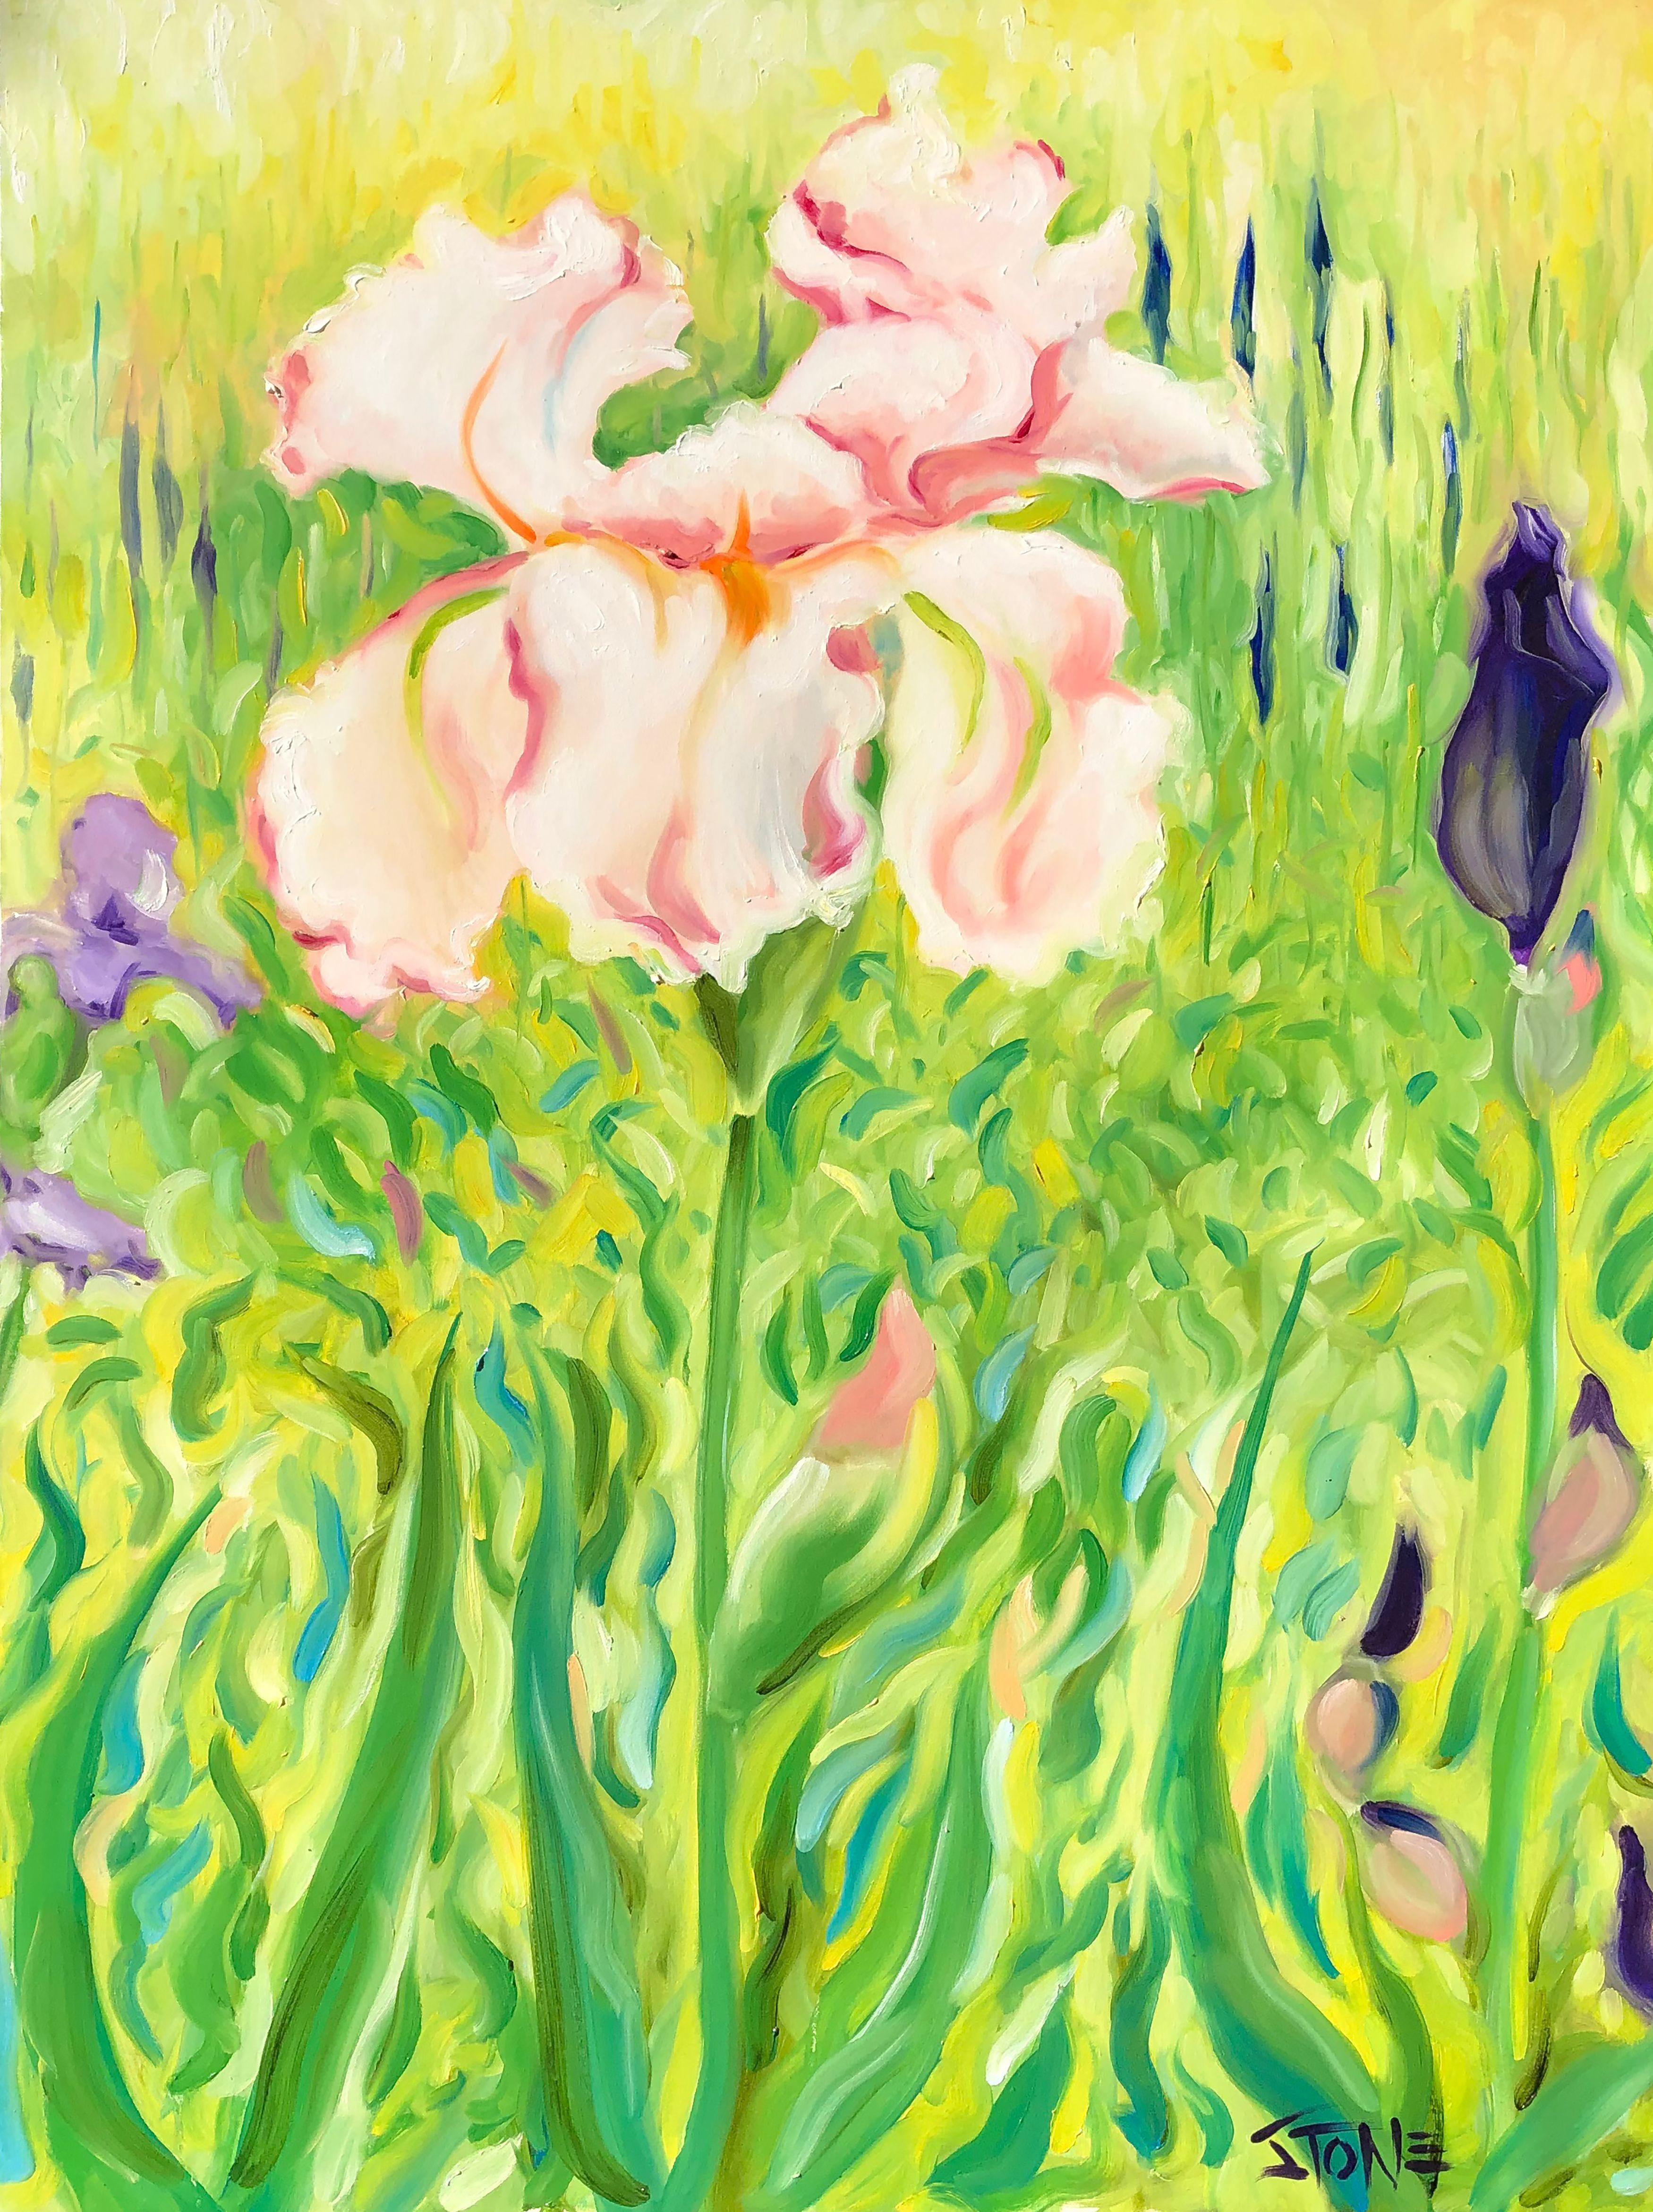 Thereâ€™s one very big pink iris in the flower garden. (Side-stapled canvas, should be framed.) :: Painting :: Impressionist :: This piece comes with an official certificate of authenticity signed by the artist :: Ready to Hang: Yes :: Signed: Yes